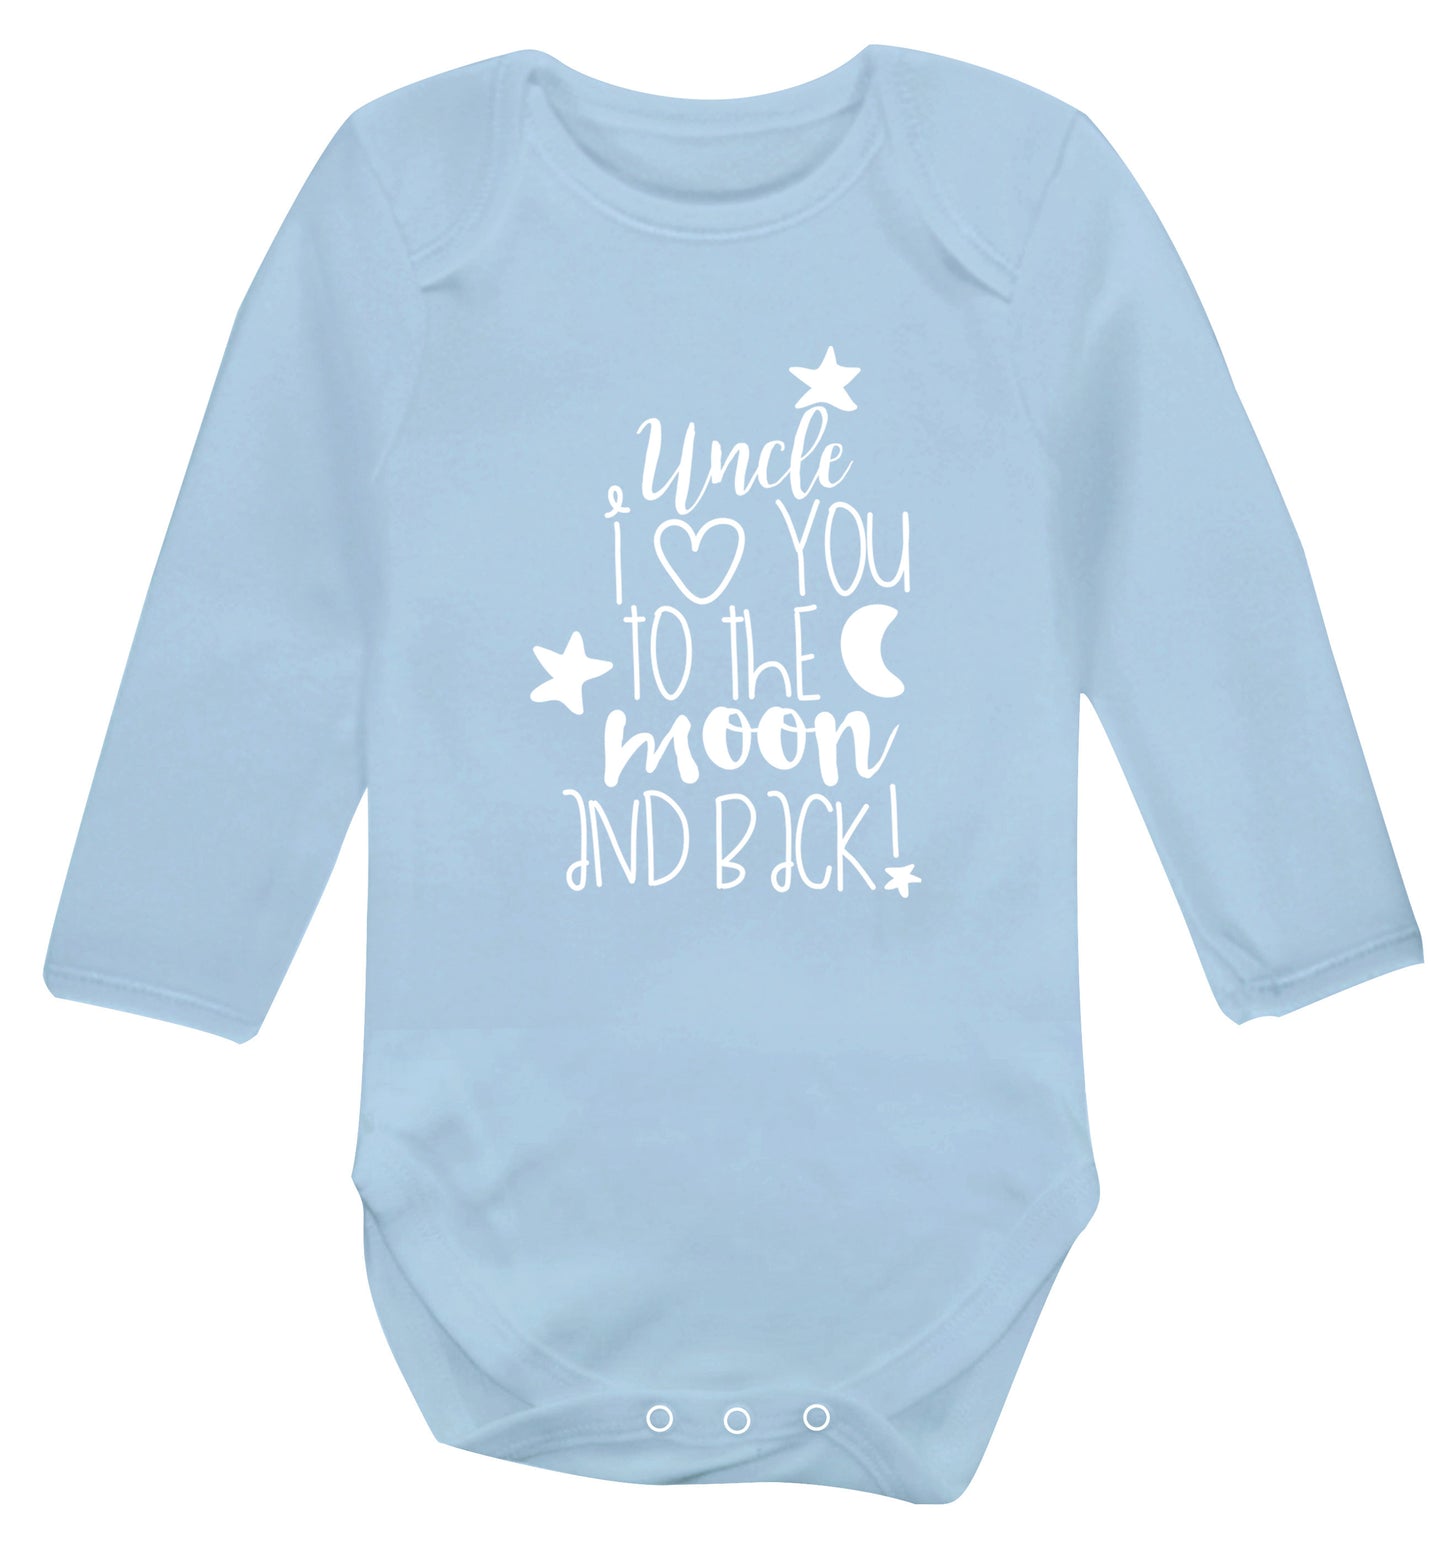 Uncle I love you to the moon and back Baby Vest long sleeved pale blue 6-12 months